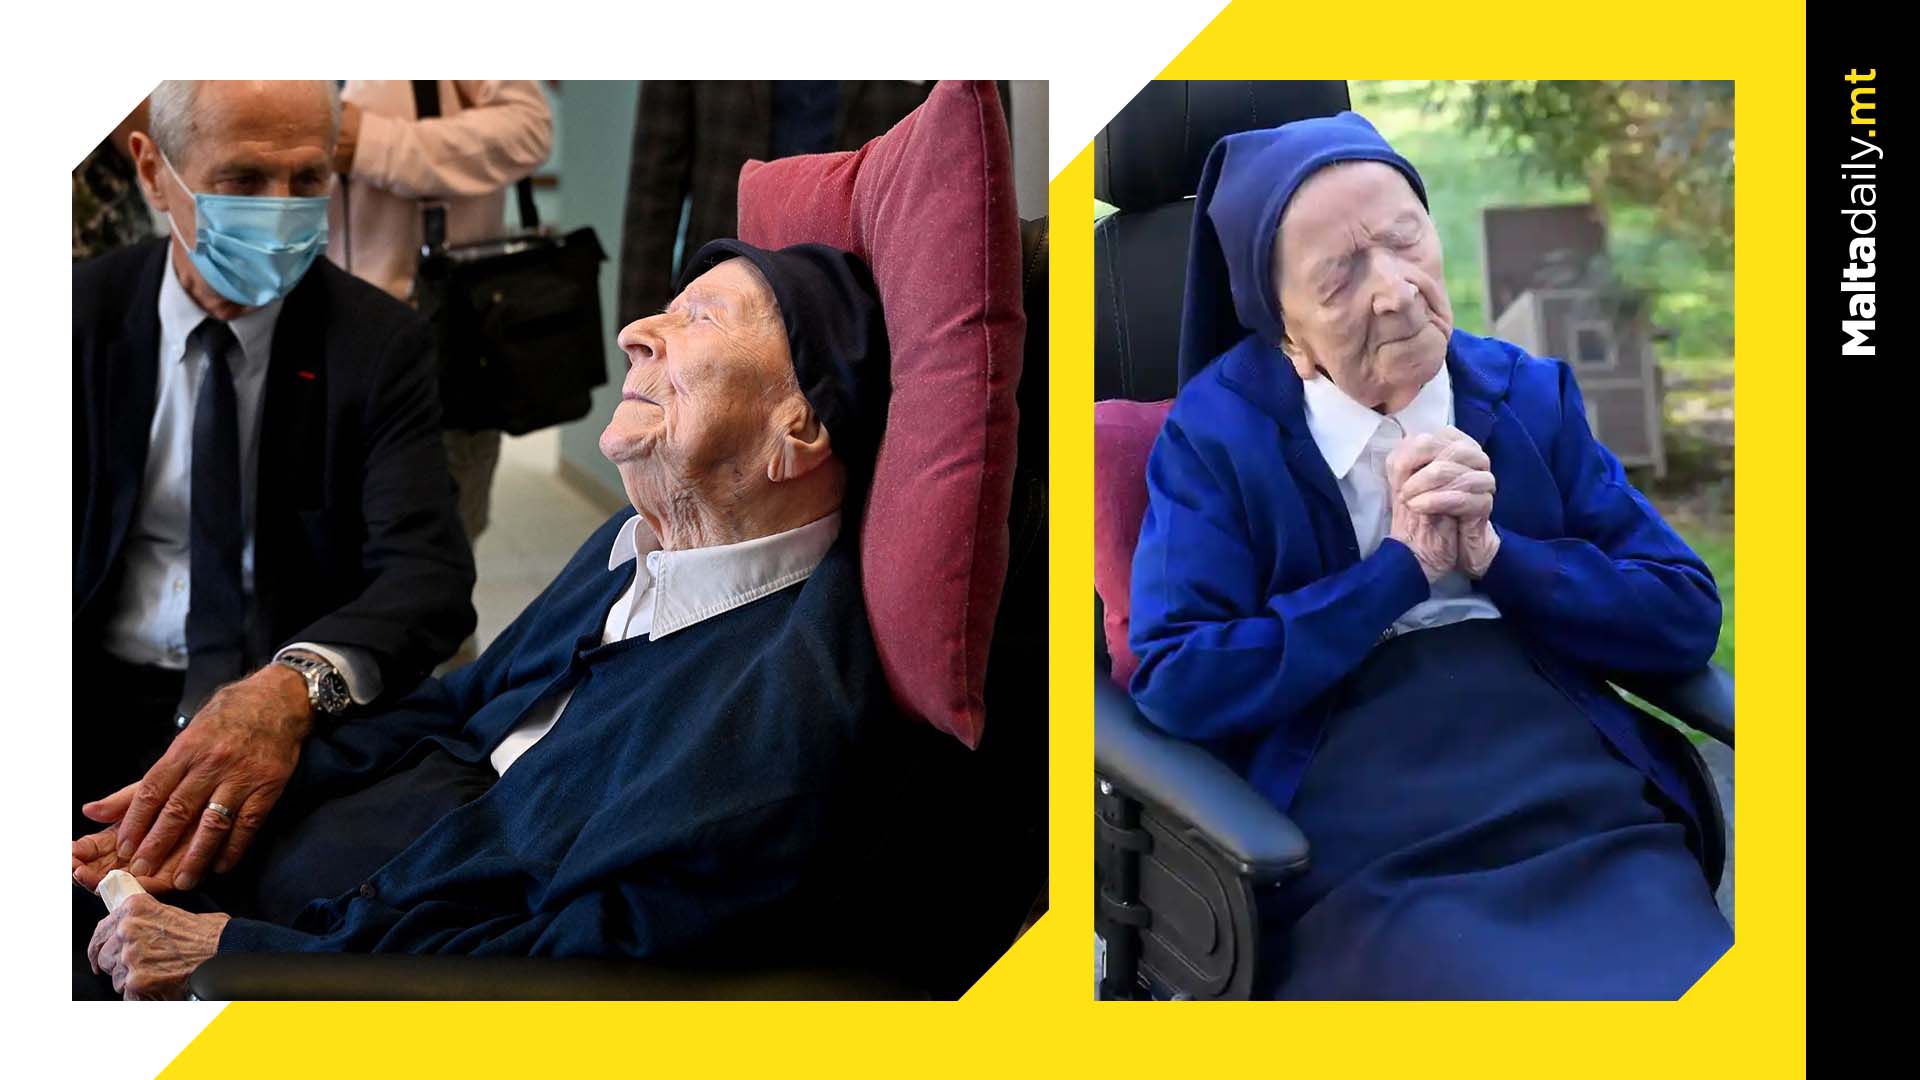 World’s oldest person Lucile Randon dies aged 118